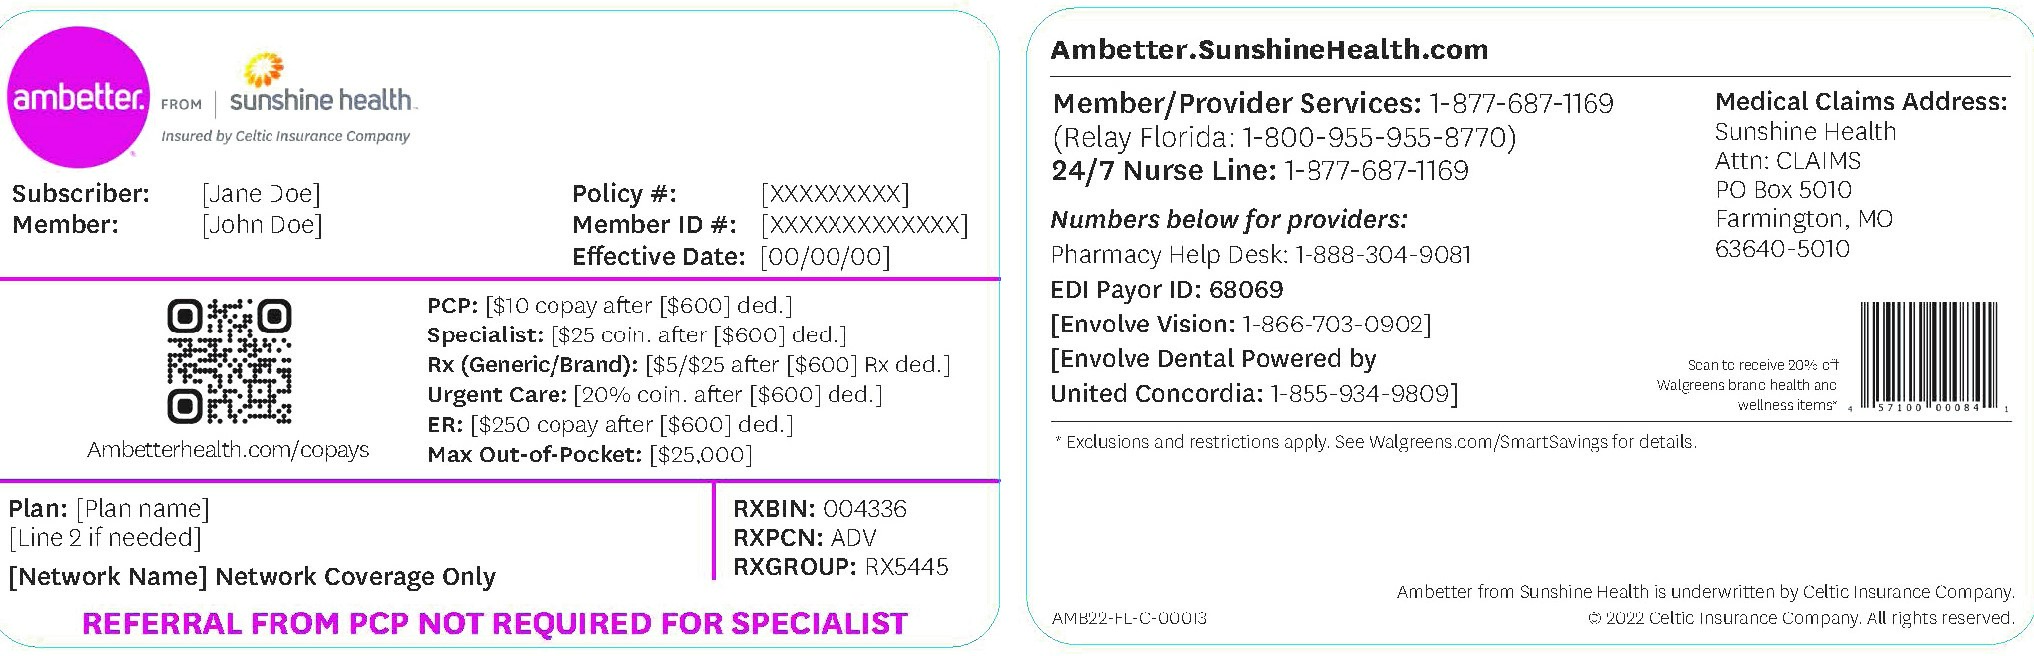 Provider Resources, Manuals & Forms Ambetter from Sunshine Health